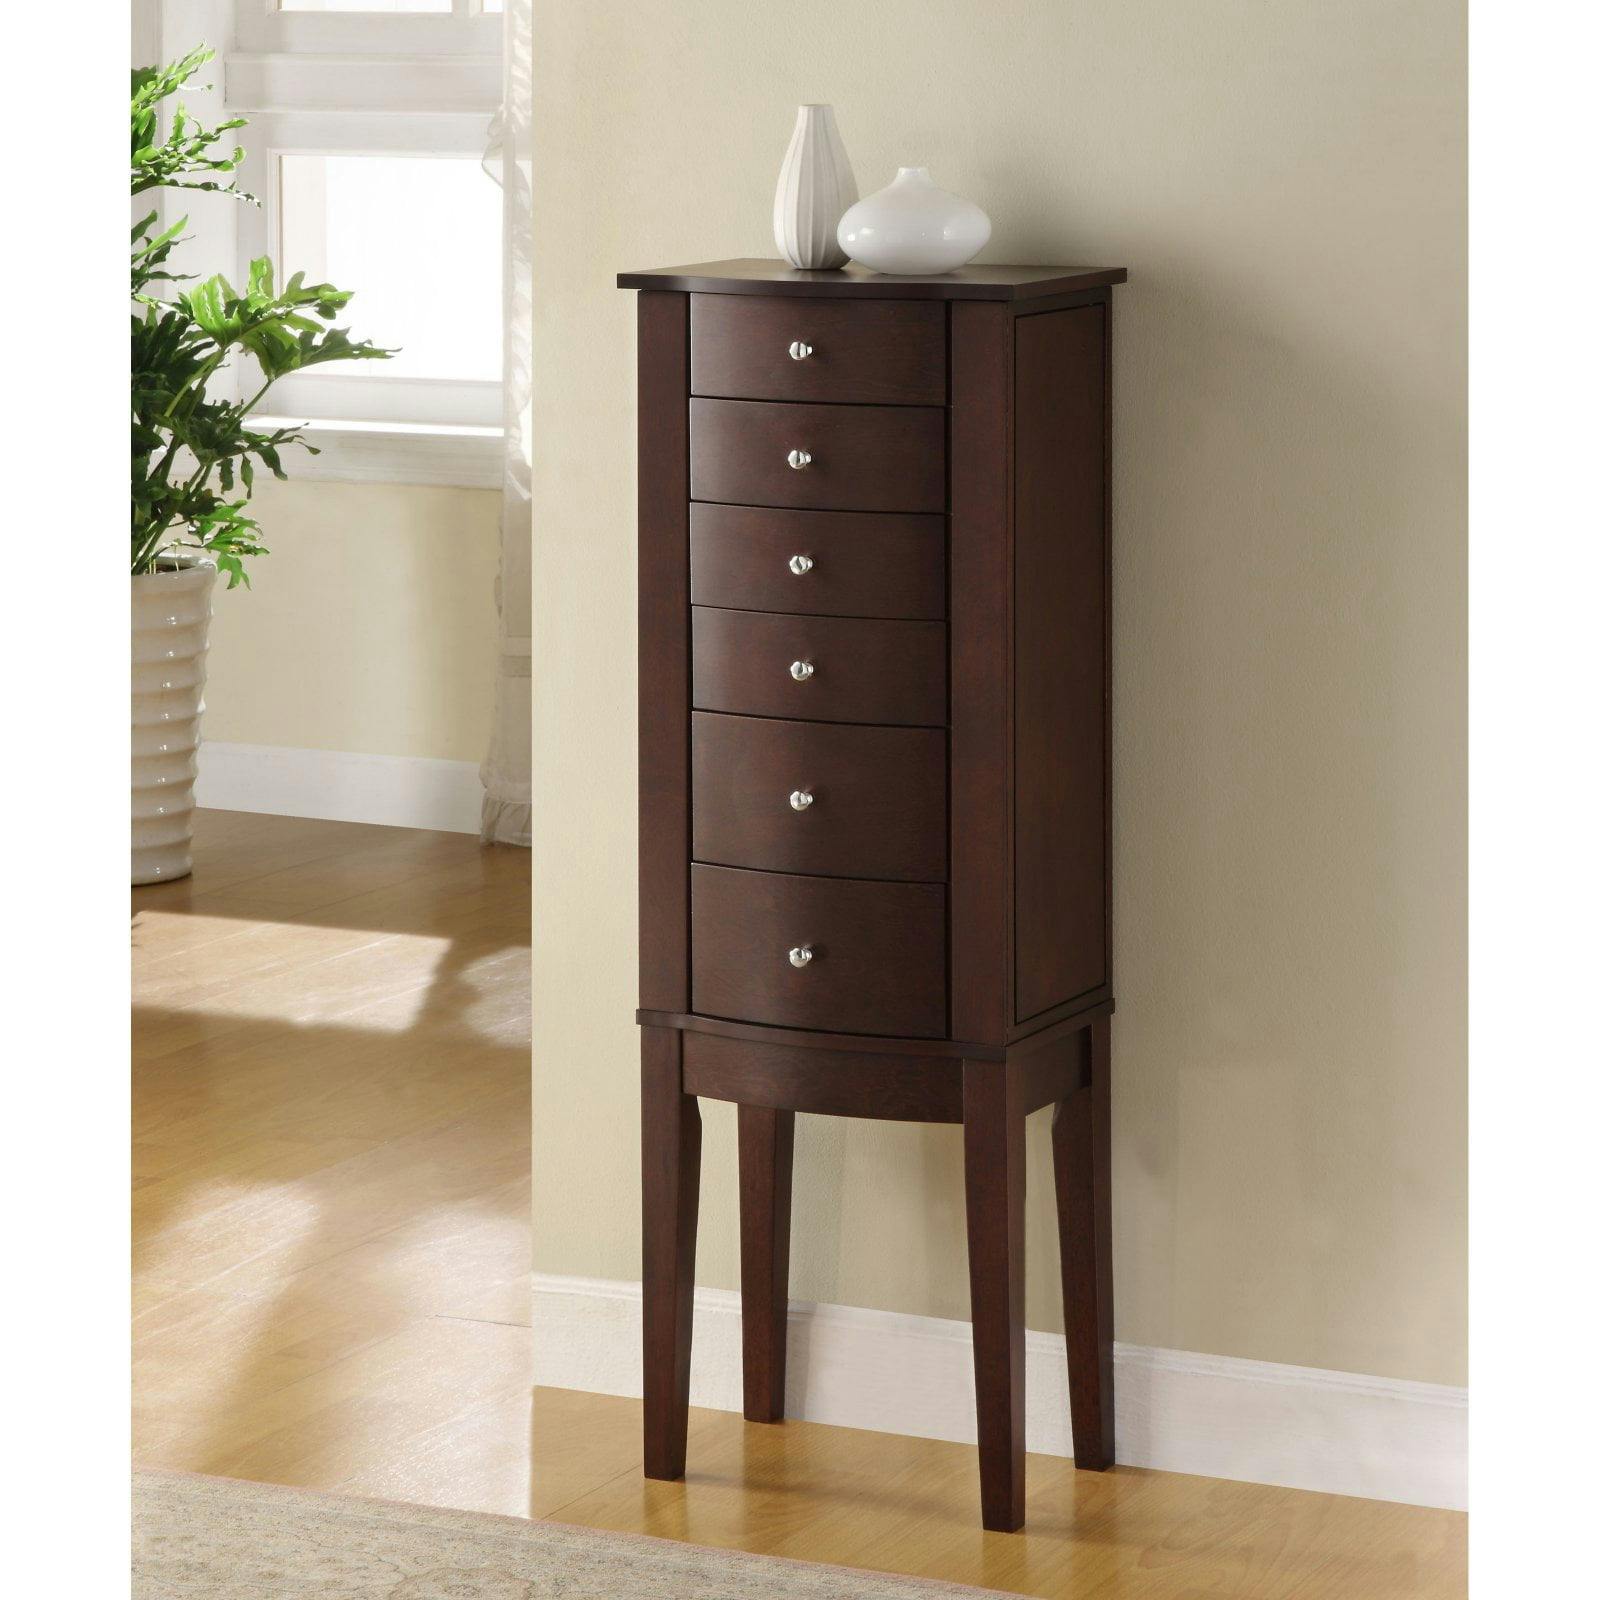 Contemporary Merlot Black Lined Freestanding Jewelry Armoire